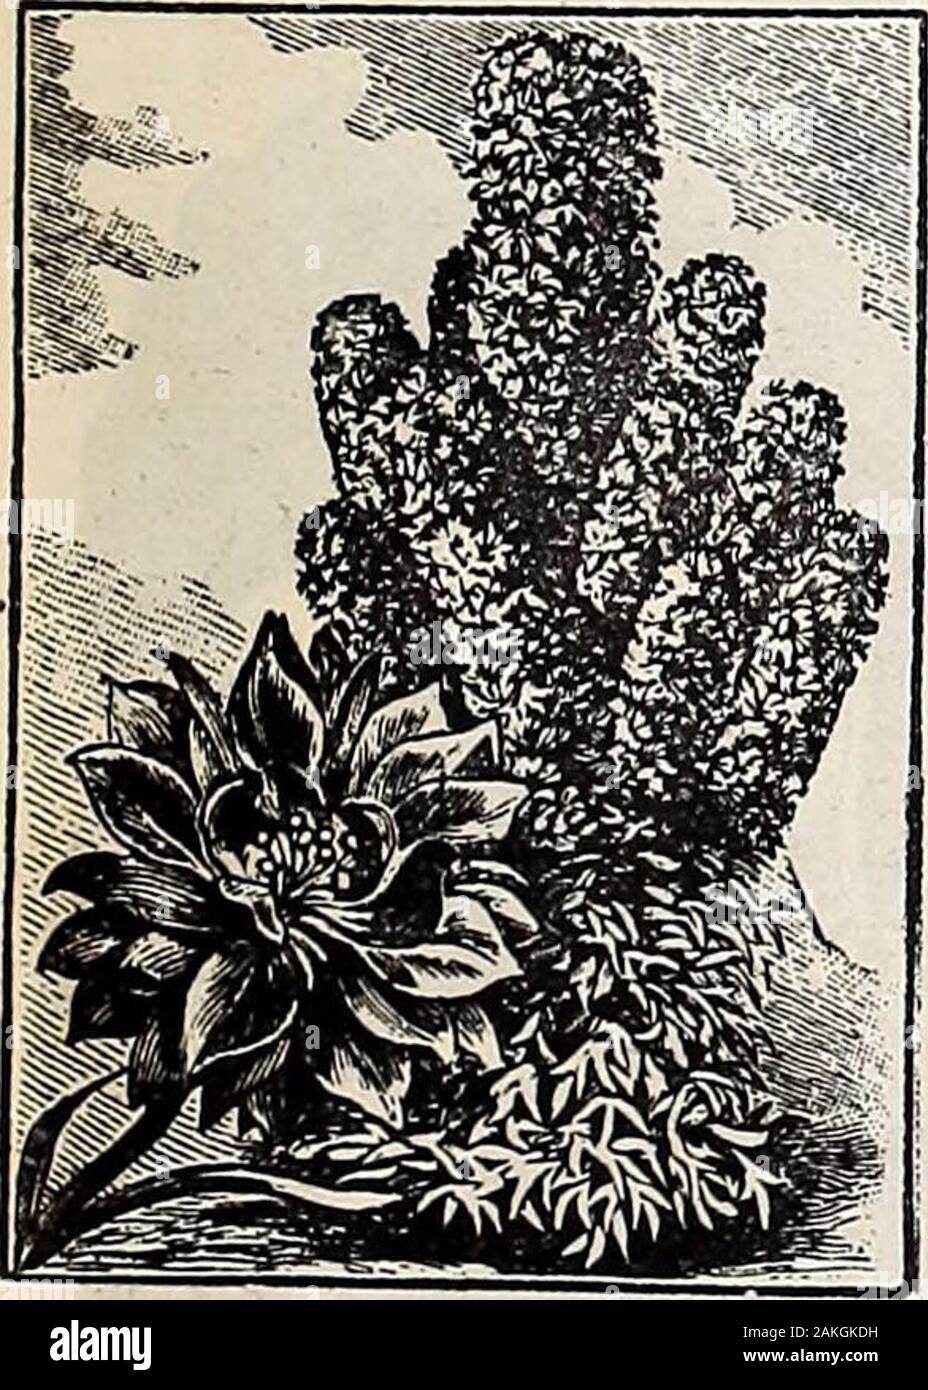 Hastings' seeds : spring 1912 catalogue . but blooms earlier and more freely than the double sorts. Packet 10 cents. Cactus Dahlias—The new strain is very popular wherever grown, being especially valuable forcut-flower work. Petals of the large flowers are beautifully pointed and the range ol coloringis remarkably satisfactory. Mixed colors. Packet, 15 cents; 2 for 25 cents. Kf*llrkl^arinOr California Poppy—One of-I^8»«JllS&gt;t,il01lZ,ia0ur most popular flowers for beddi.ig in the South. Sow as early in the spring as ground canbe worked, scattering seed thinly over the surface and rak-ing in Stock Photo